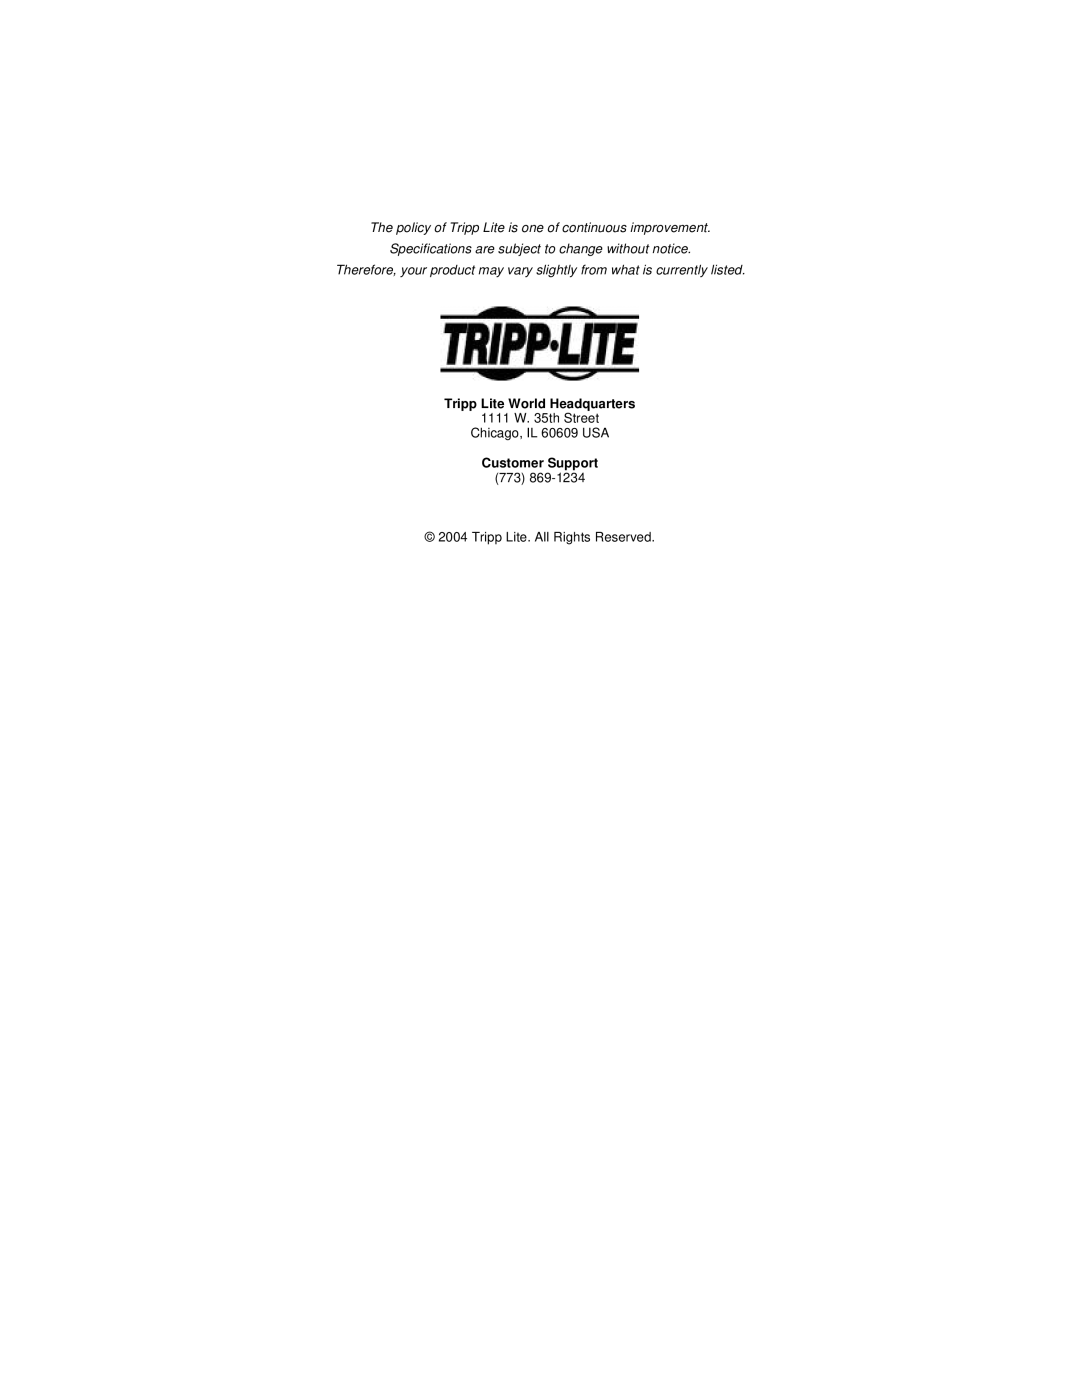 Tripp Lite OMNISMART450HG warranty The policy of Tripp Lite is one of continuous improvement, Tripp Lite World Headquarters 